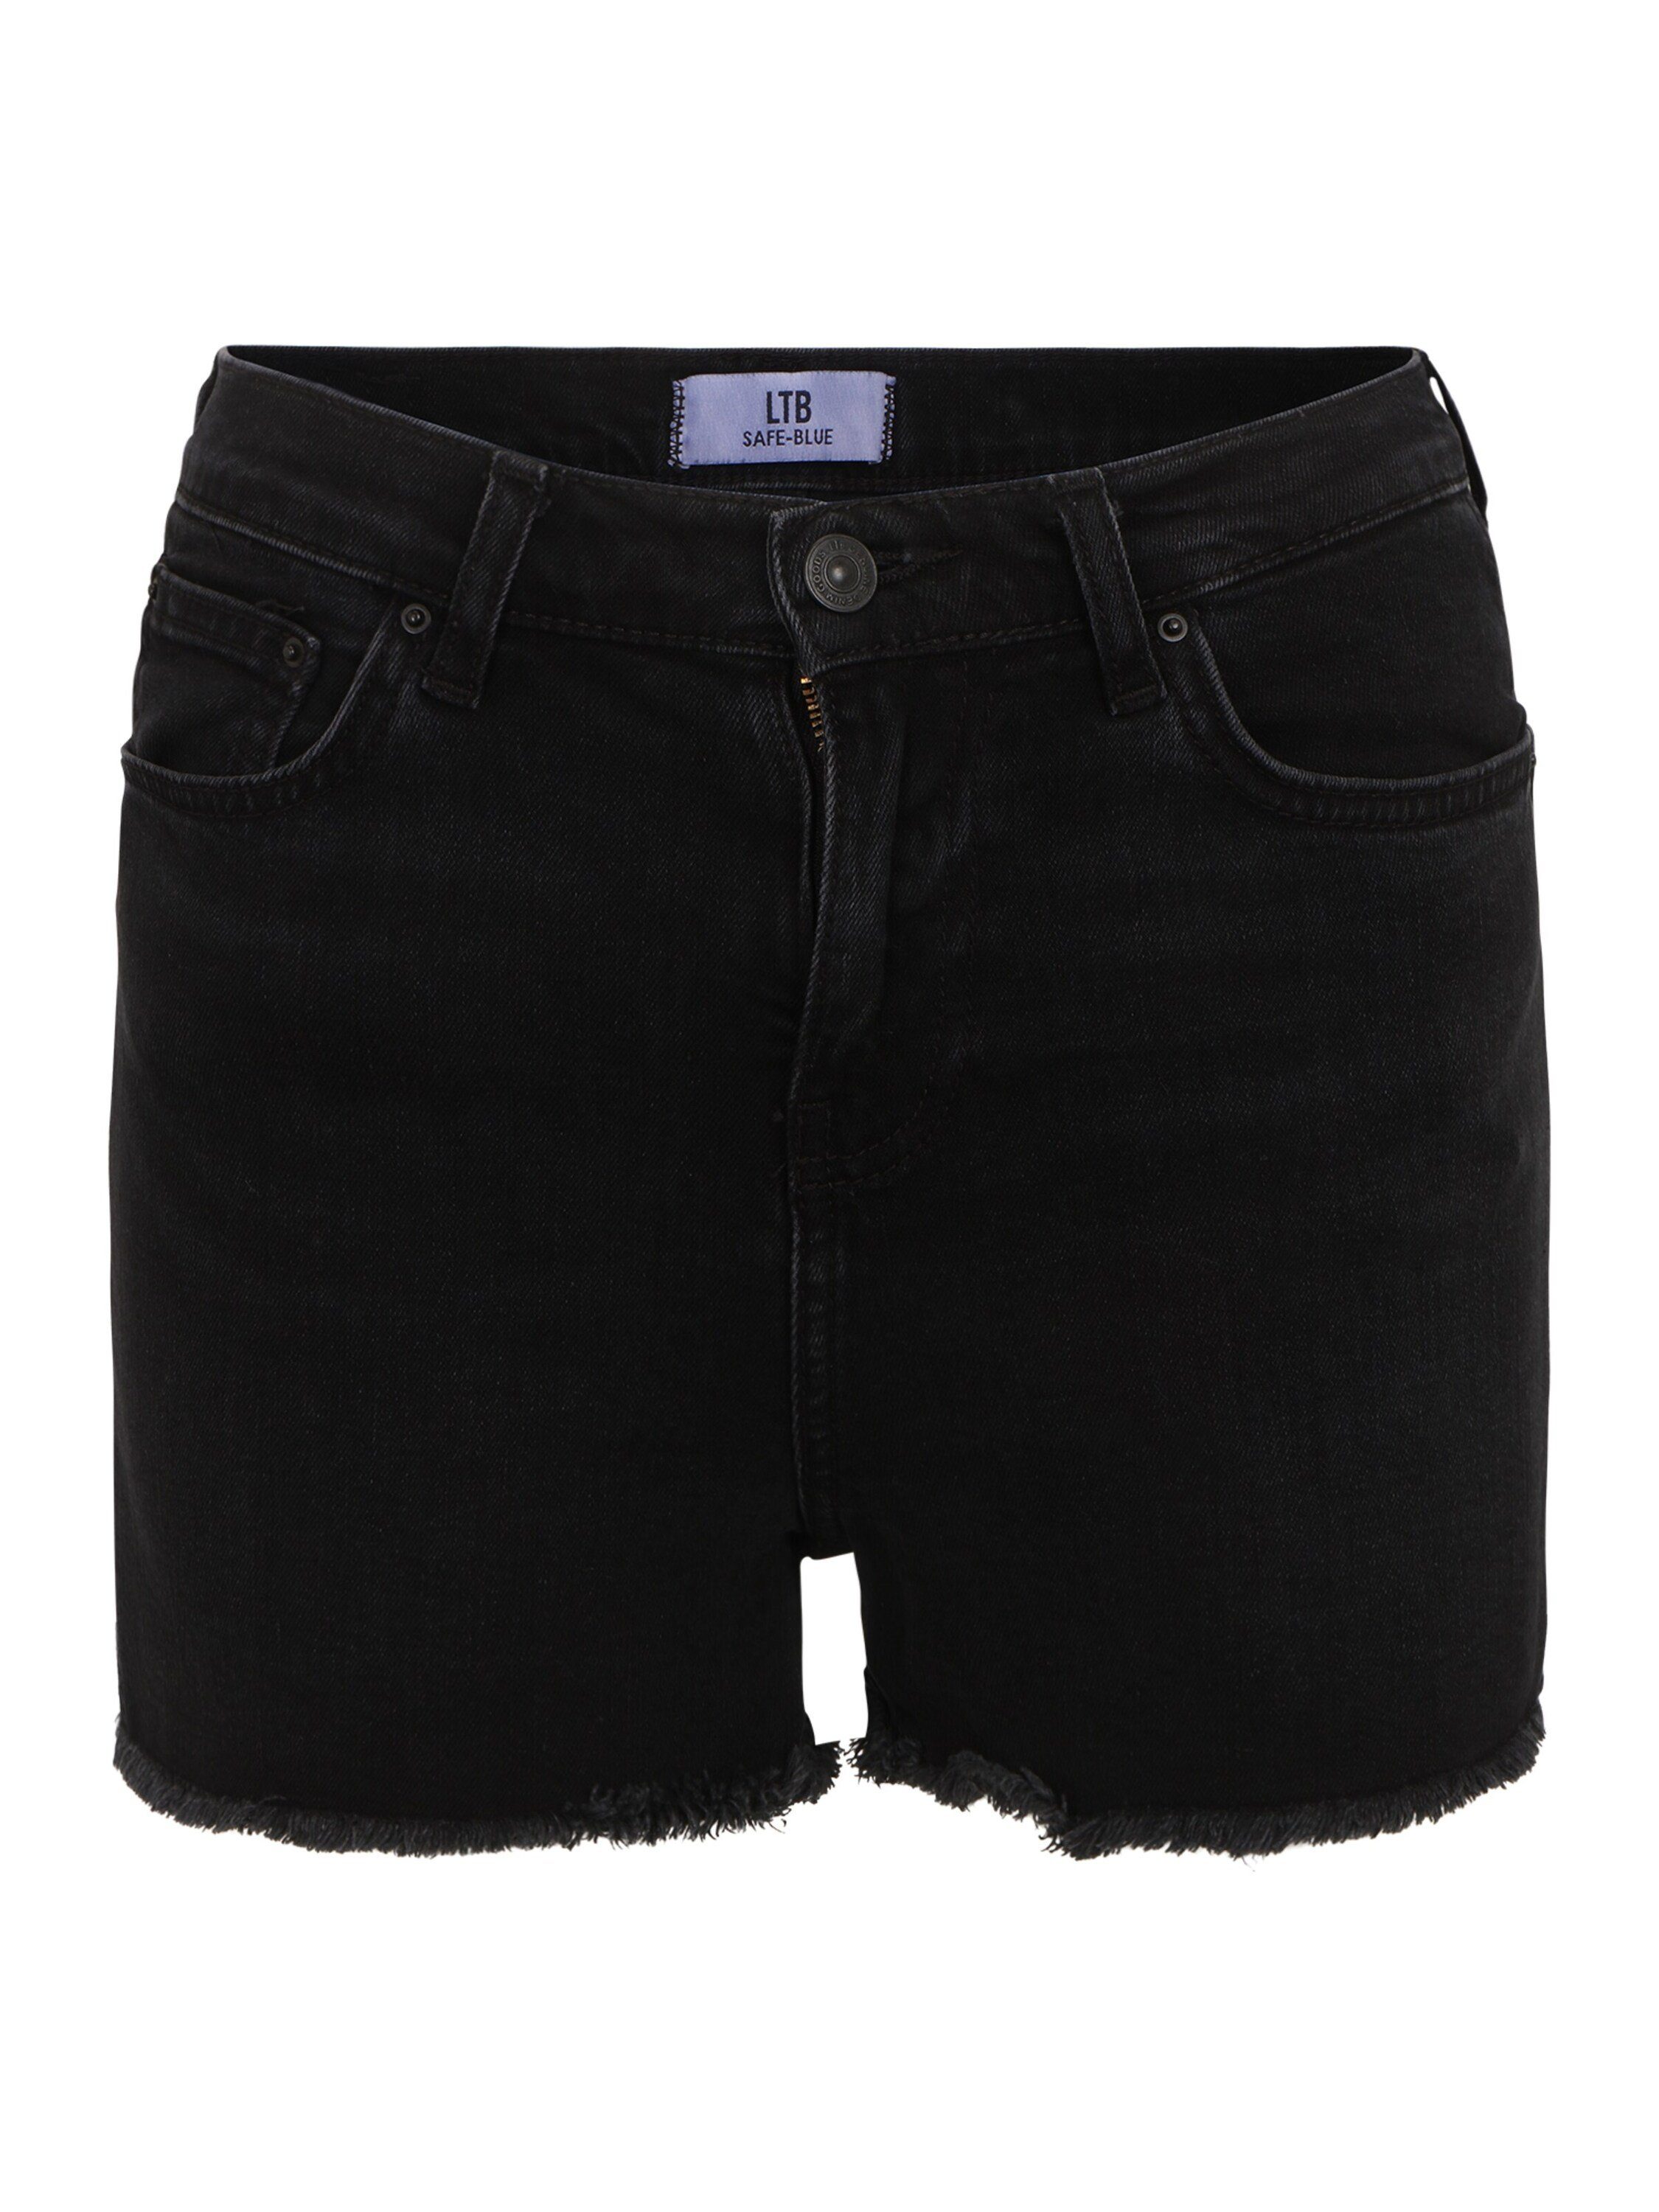 LTB Jeansshorts Layla (1-tlg) Patches, Weiteres Detail, Fransen